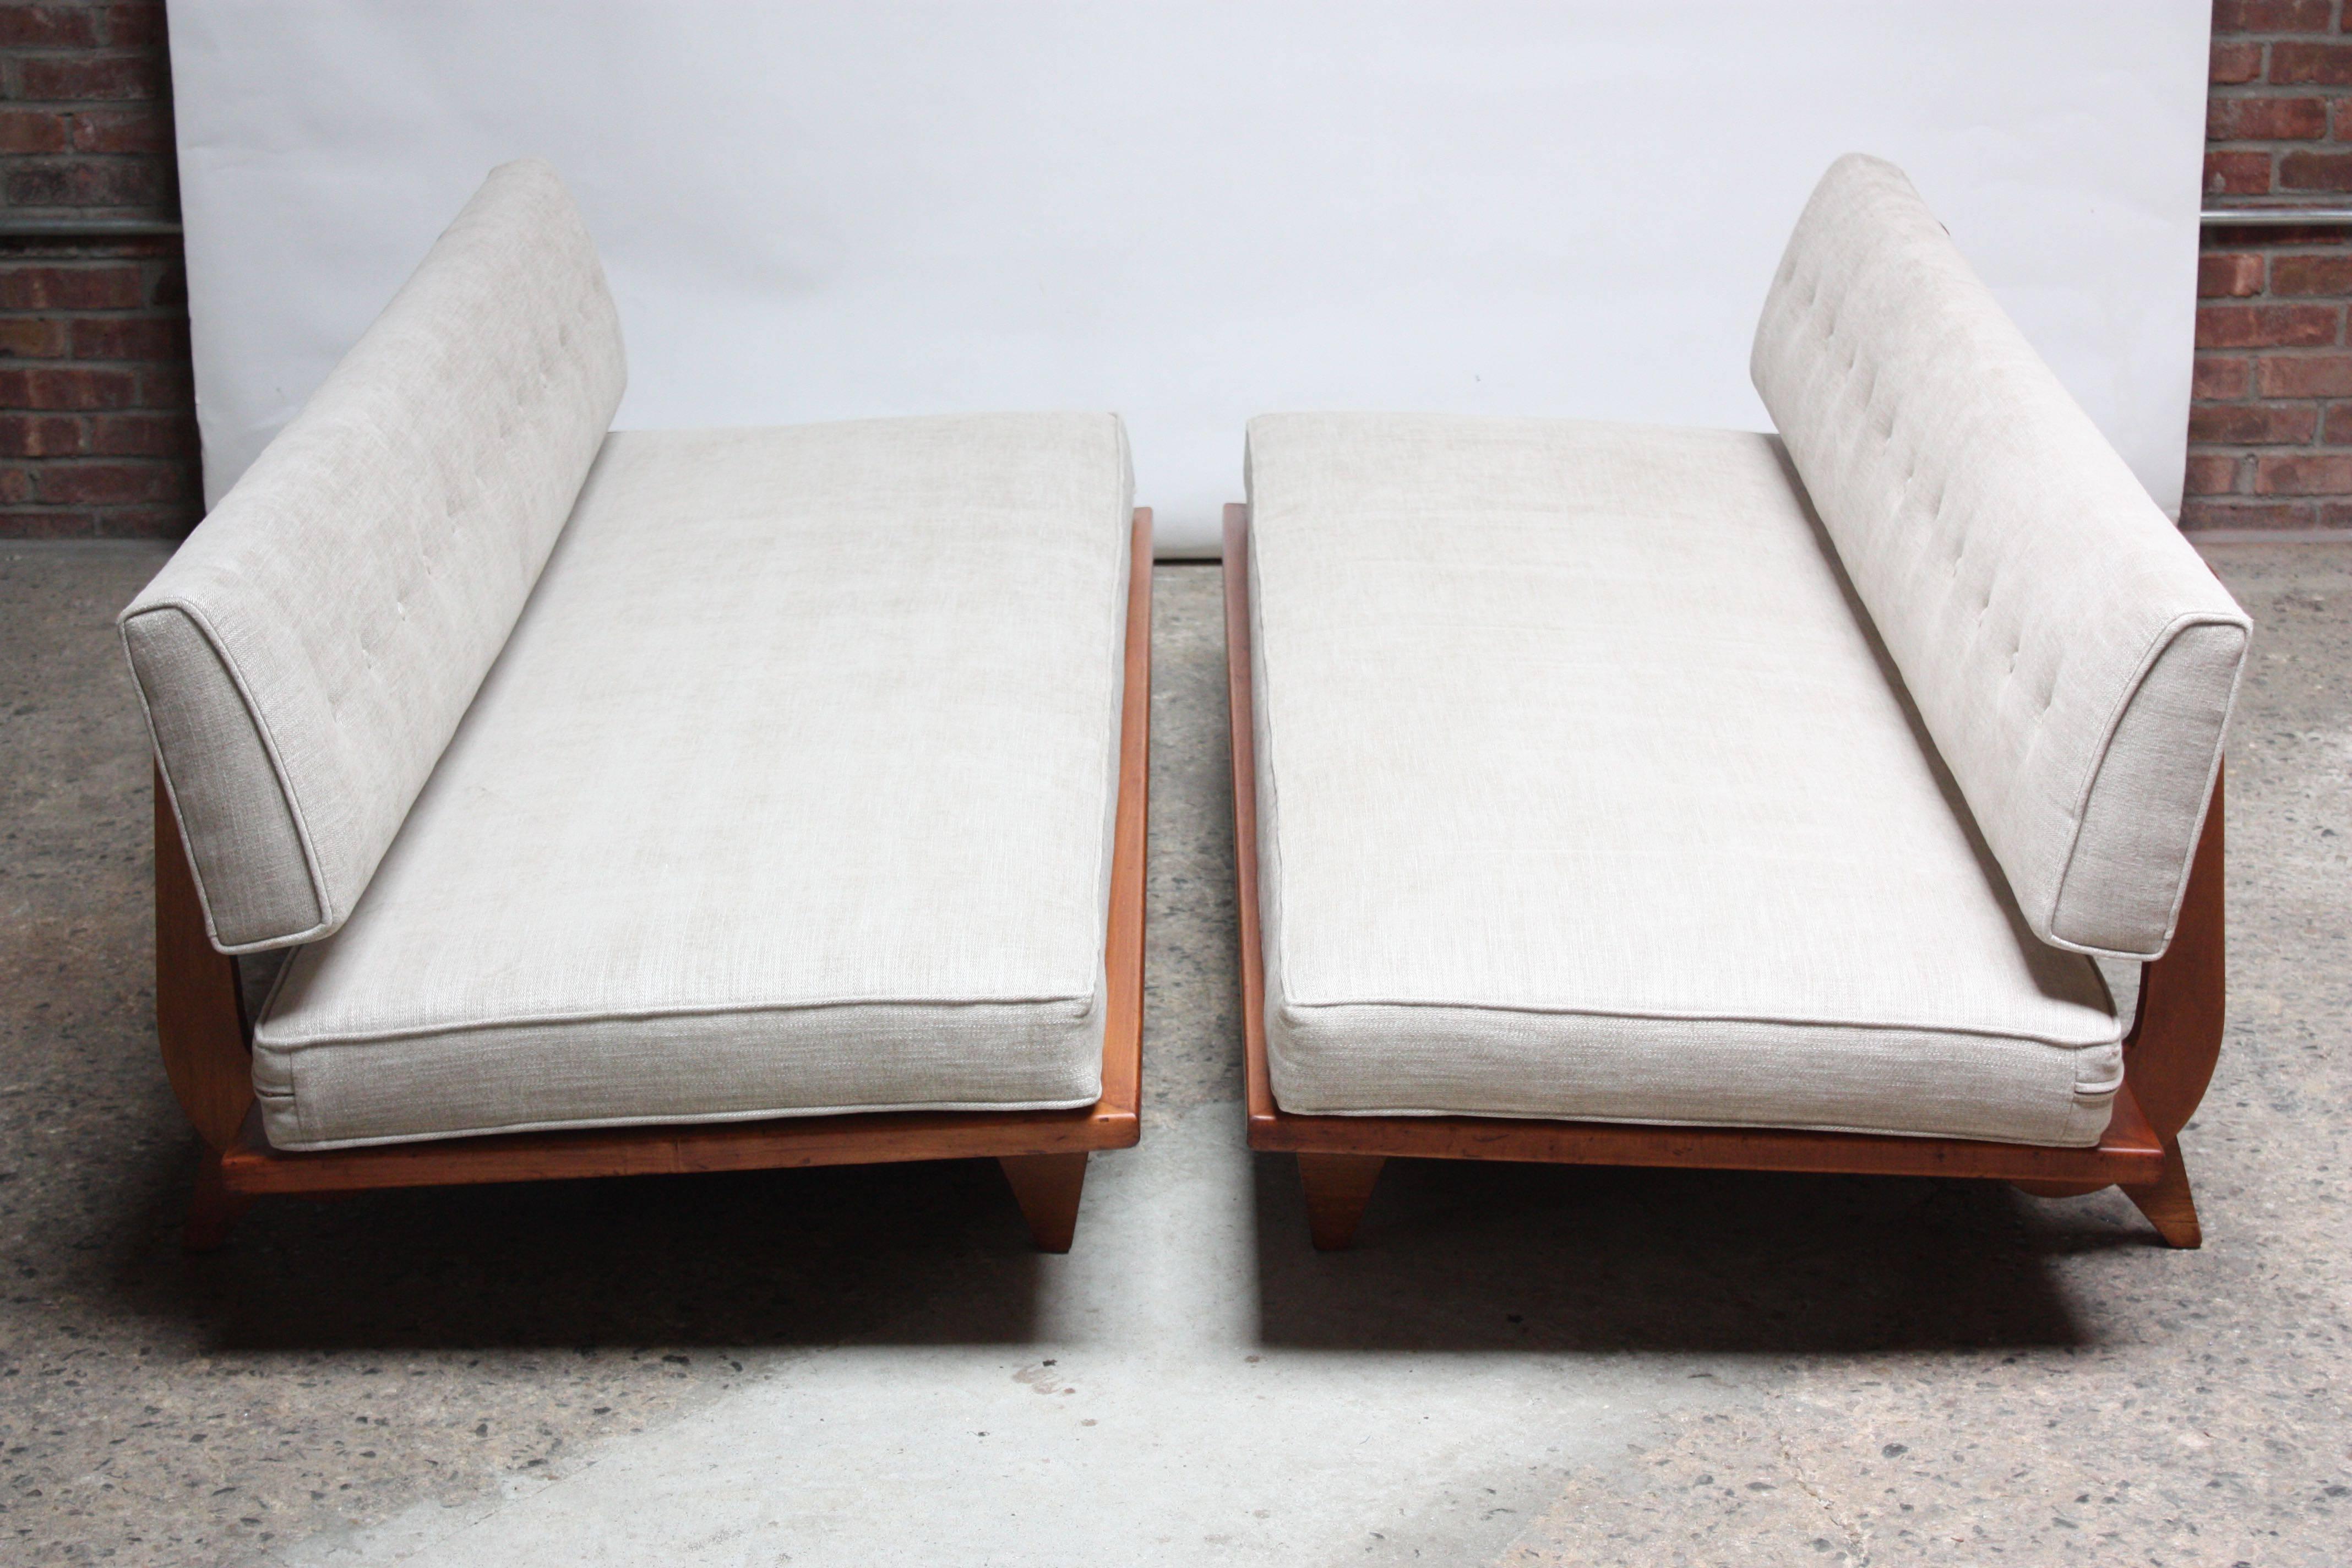 These sofa sleepers (model #700) were designed by Richard Stein for Knoll in 1947. The foot pedal under the seat lowers the upholstered seat back. It can recline to a 45 degree angle, or drop down entirely, so the back frame is even with the ground.